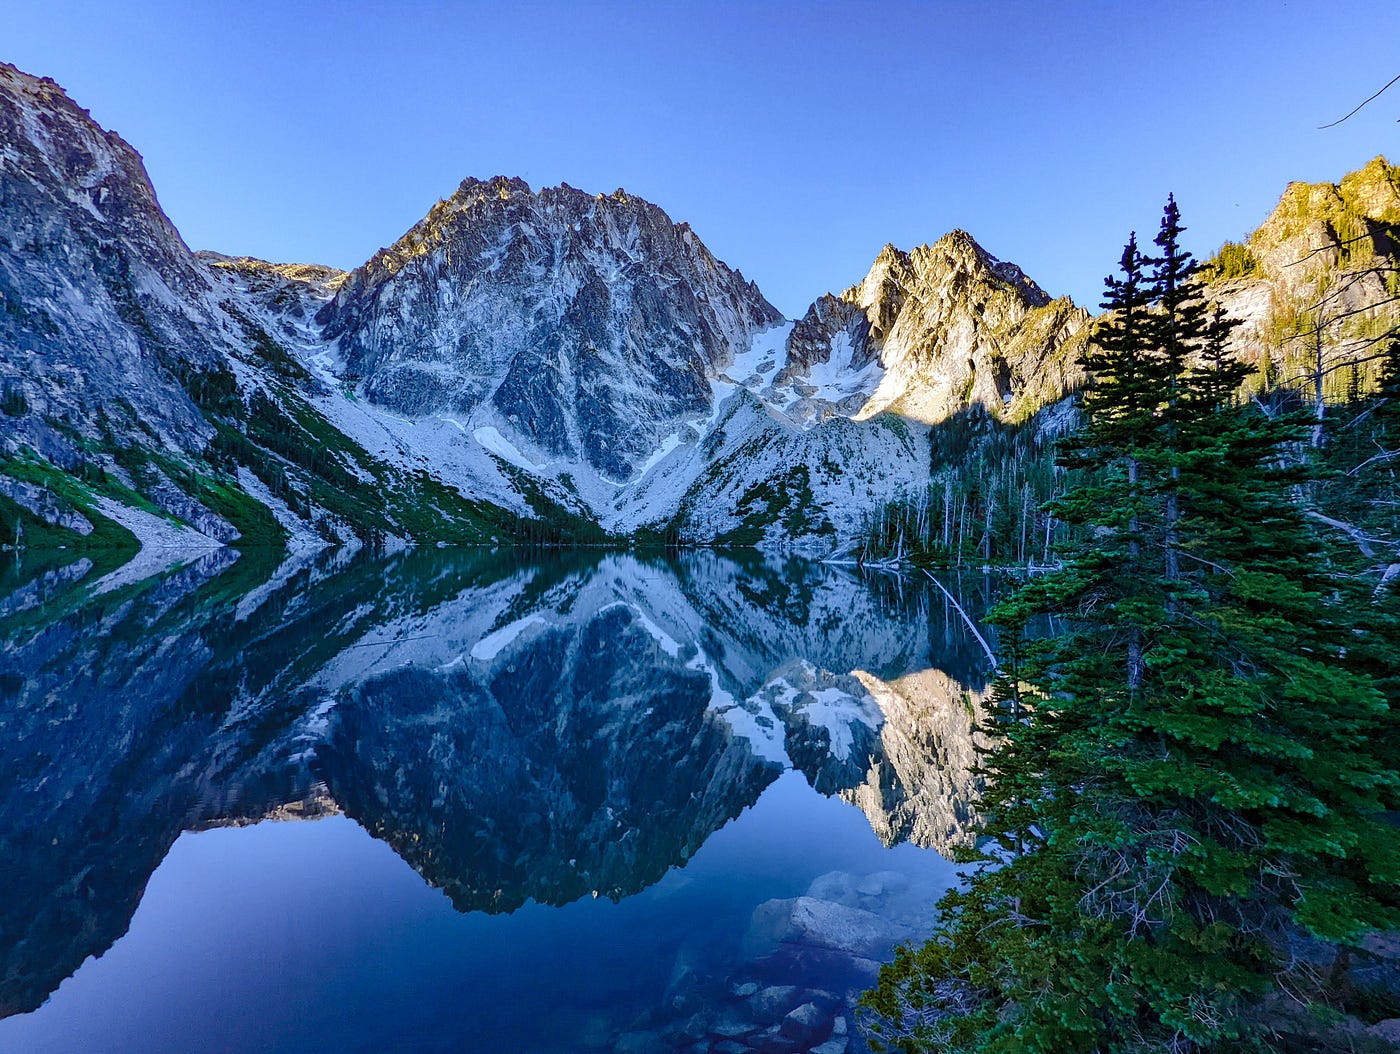 Hiking To Colchuck Lake – What You Need To Know Before You Go